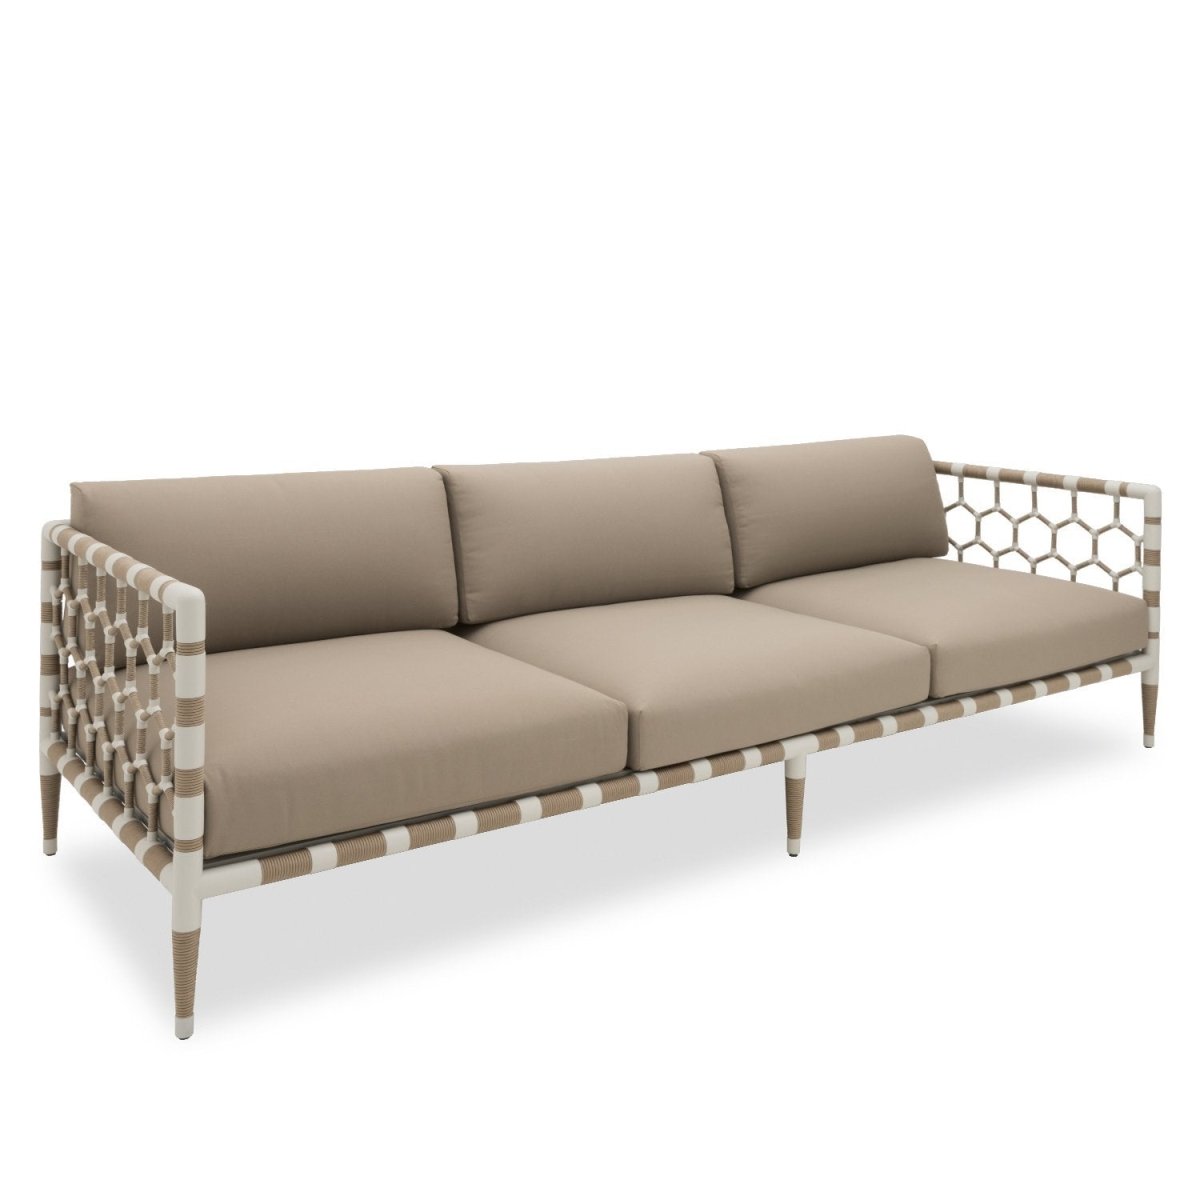 Olympia 3 Seat Sofa - Taupe Fabric with Pearl Powder Coated Frame